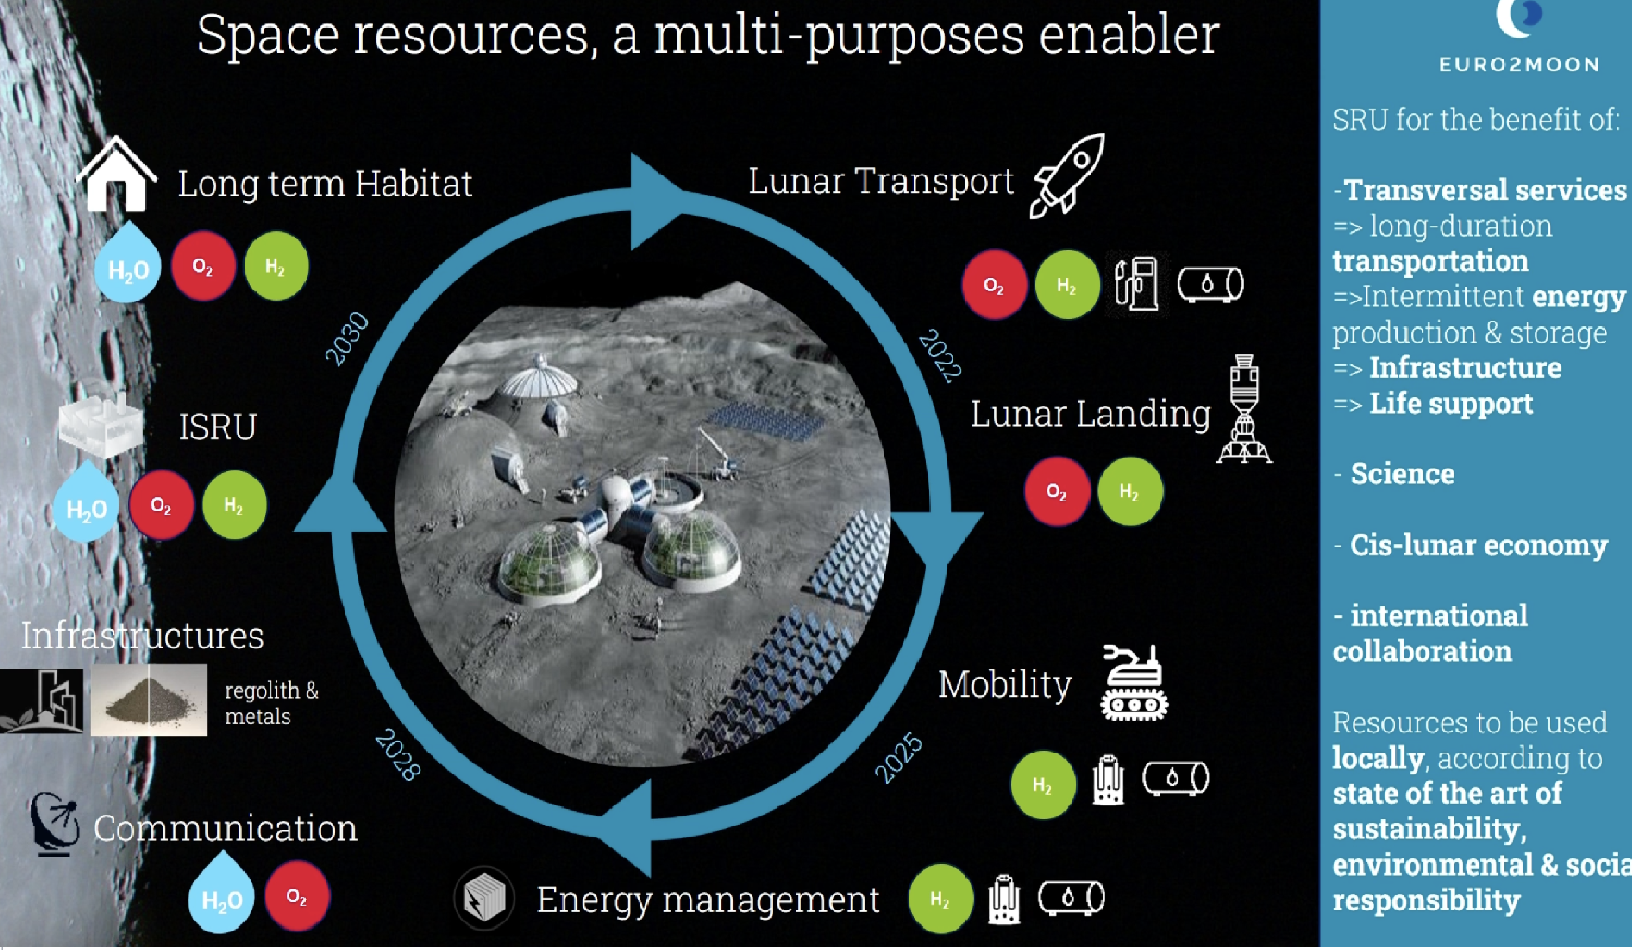 Space resources, a multi-purposes enabler Copyright: Credit Euro2Moon